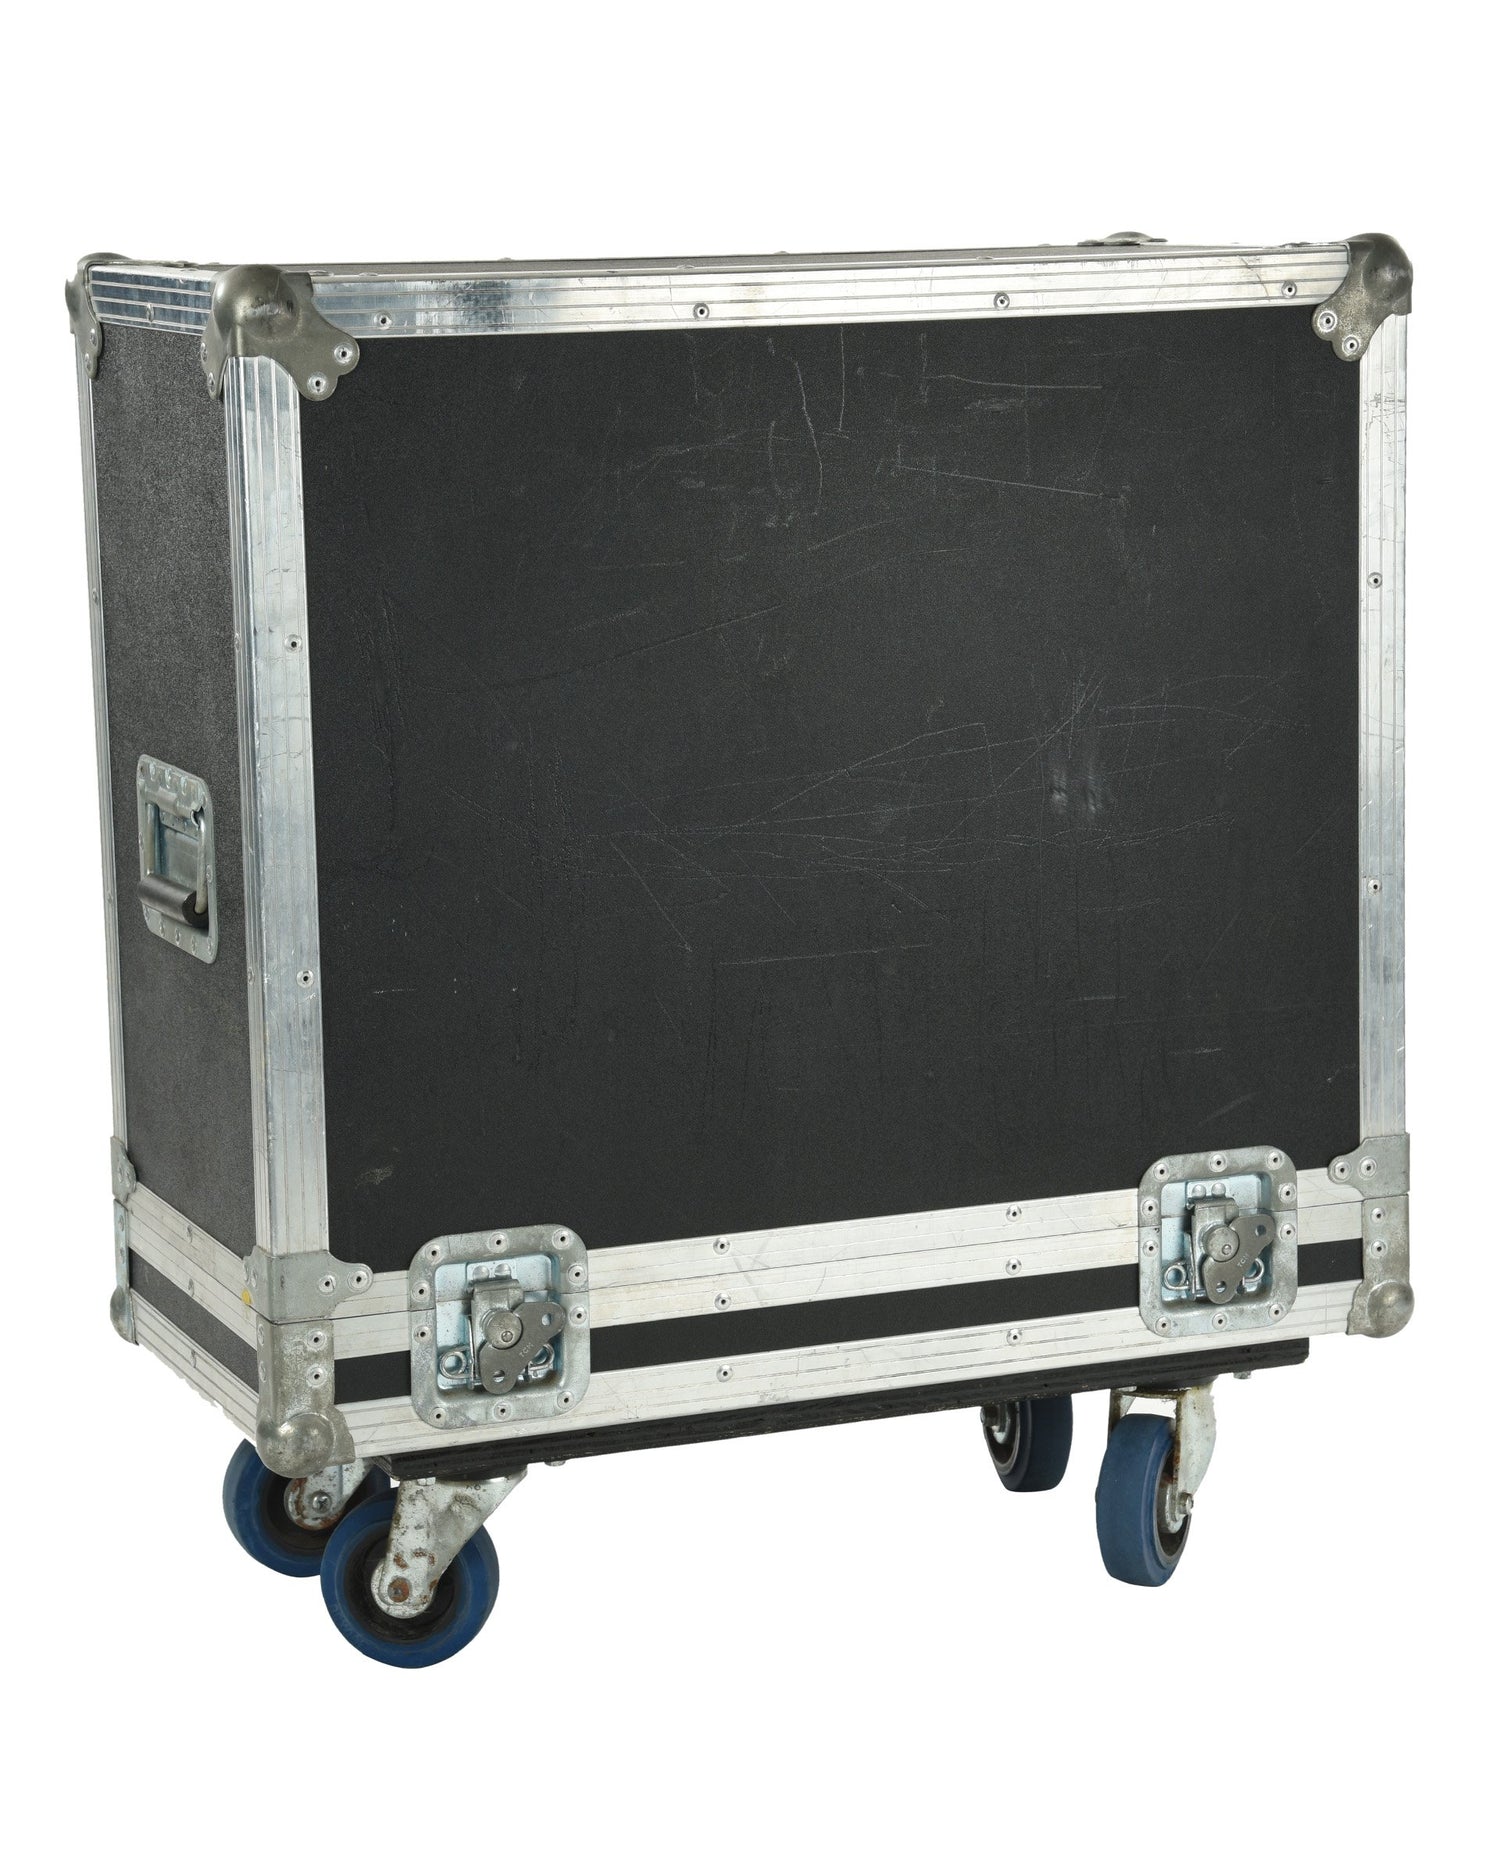 Image 1 of Amp Road Case - SKU# 200U-200983 : Product Type Accessories & Parts : Elderly Instruments